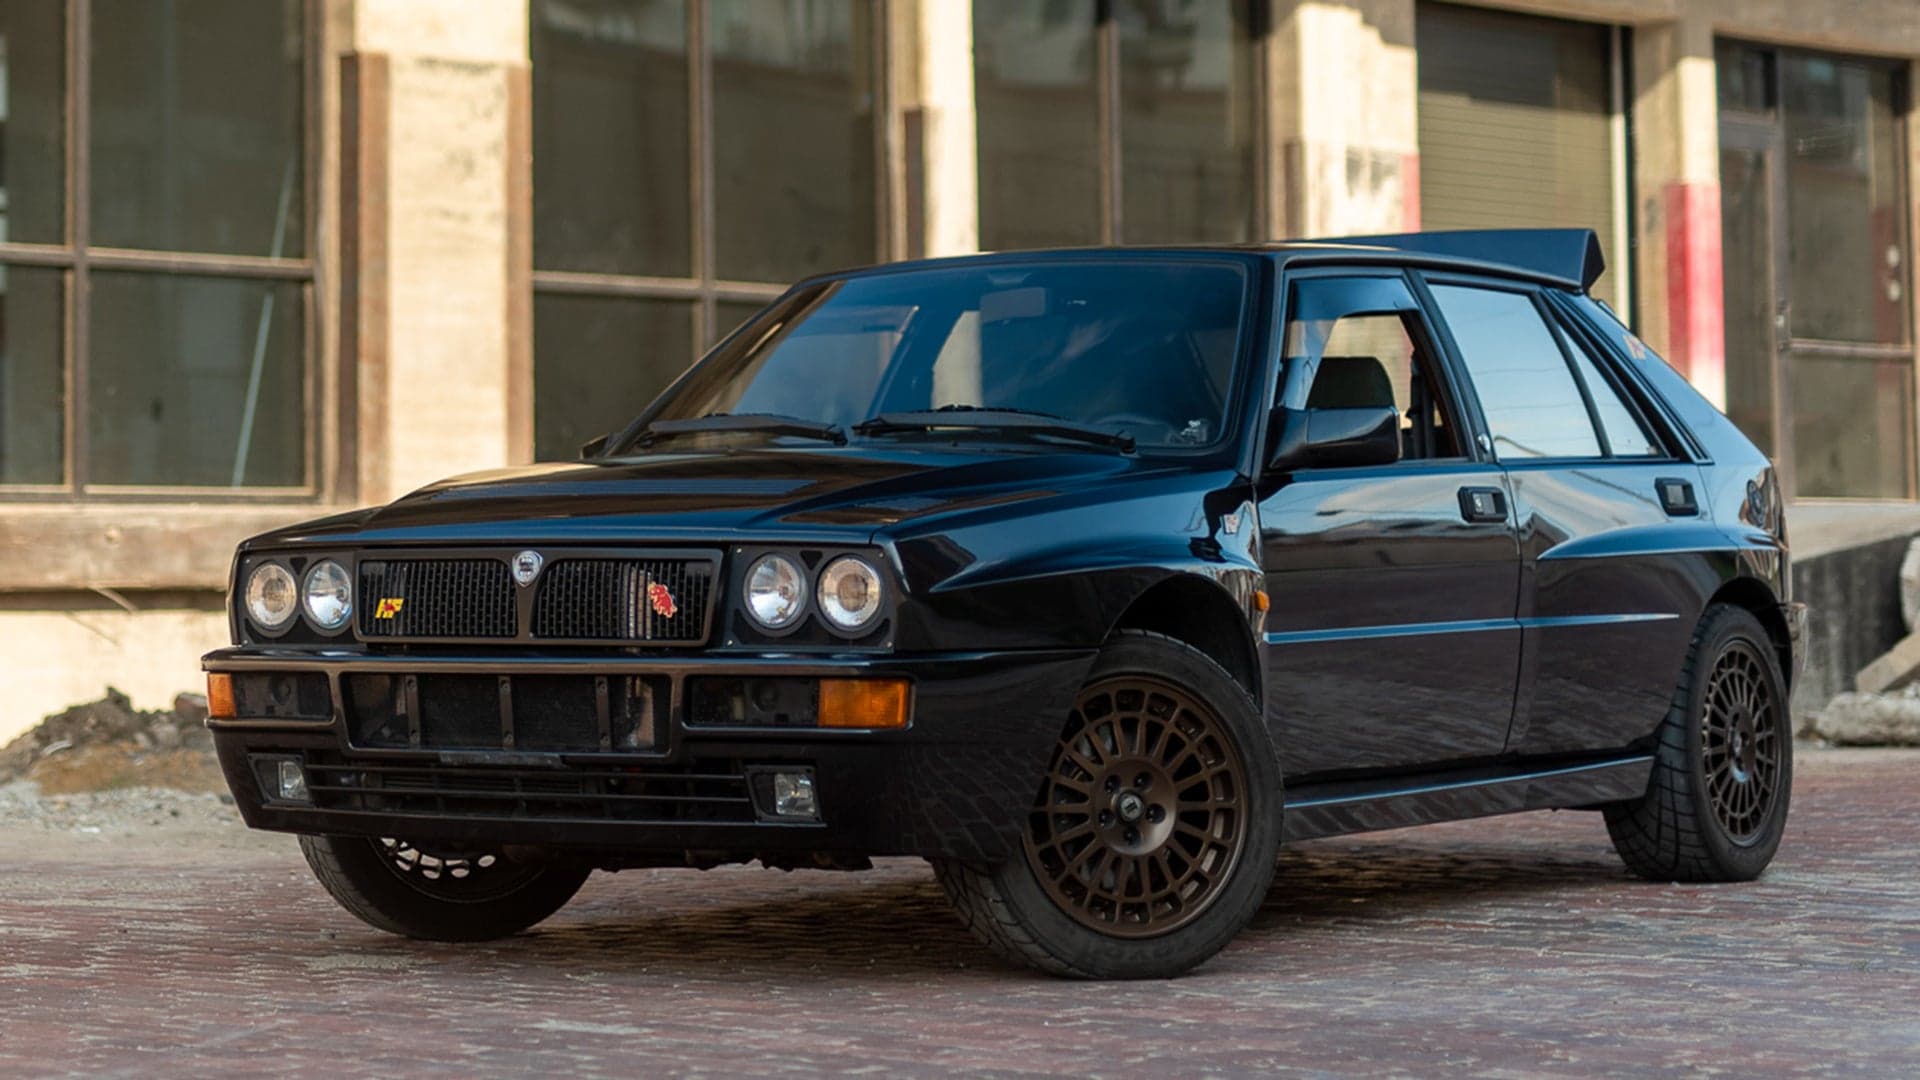 1992 Lancia Delta HF Integrale Evoluzione Review: This Rally Masterpiece Deserves the Hype